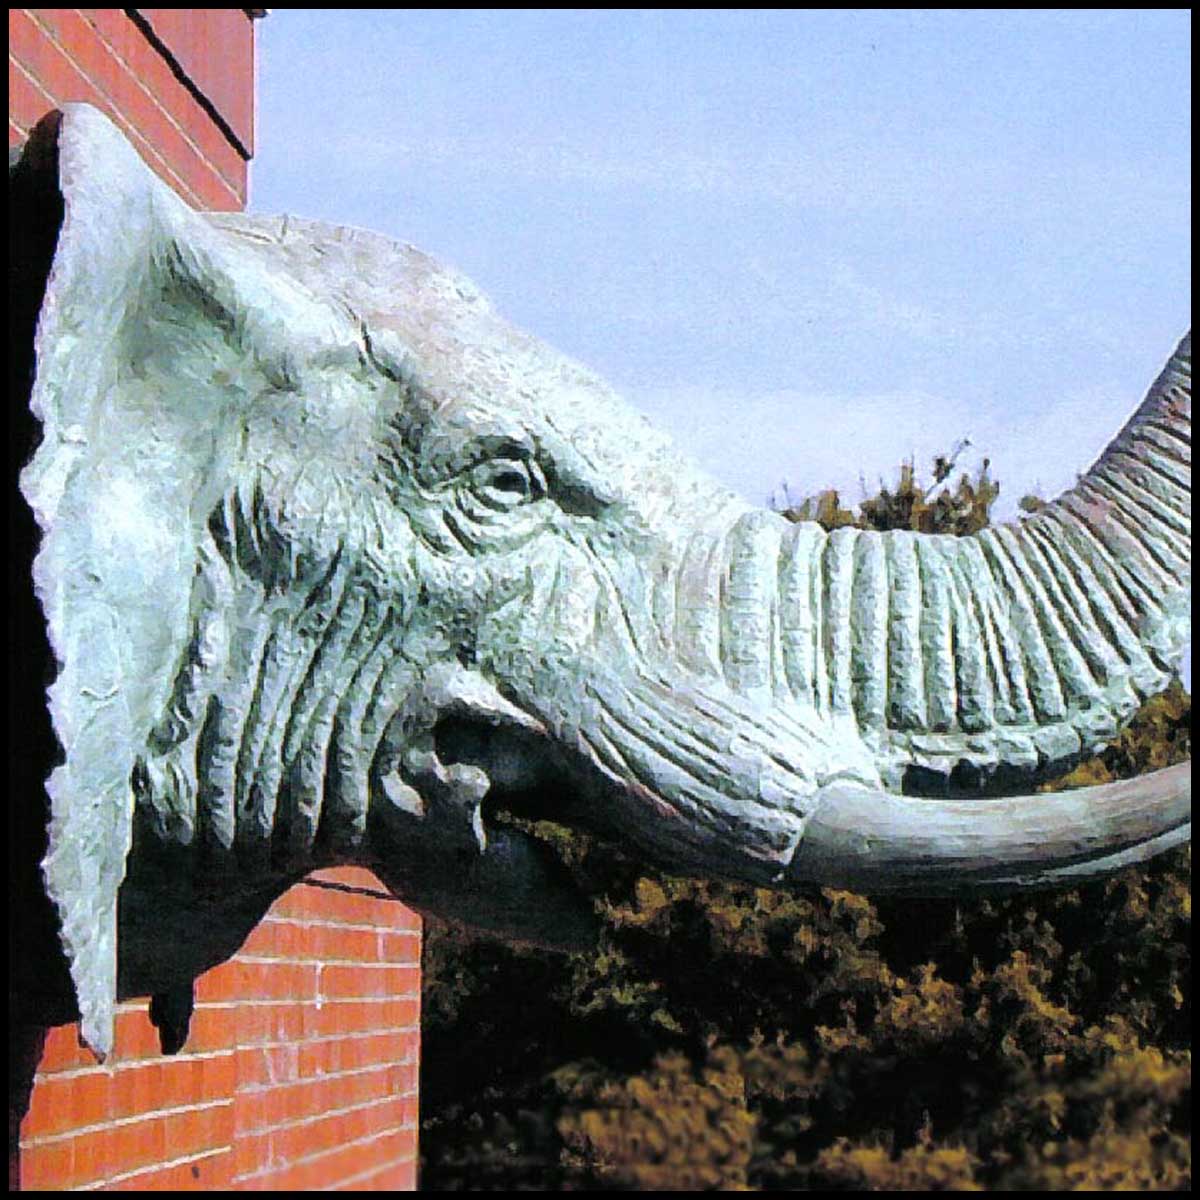 photo of green-colored bronze sculpture of an elephant head on a brick building